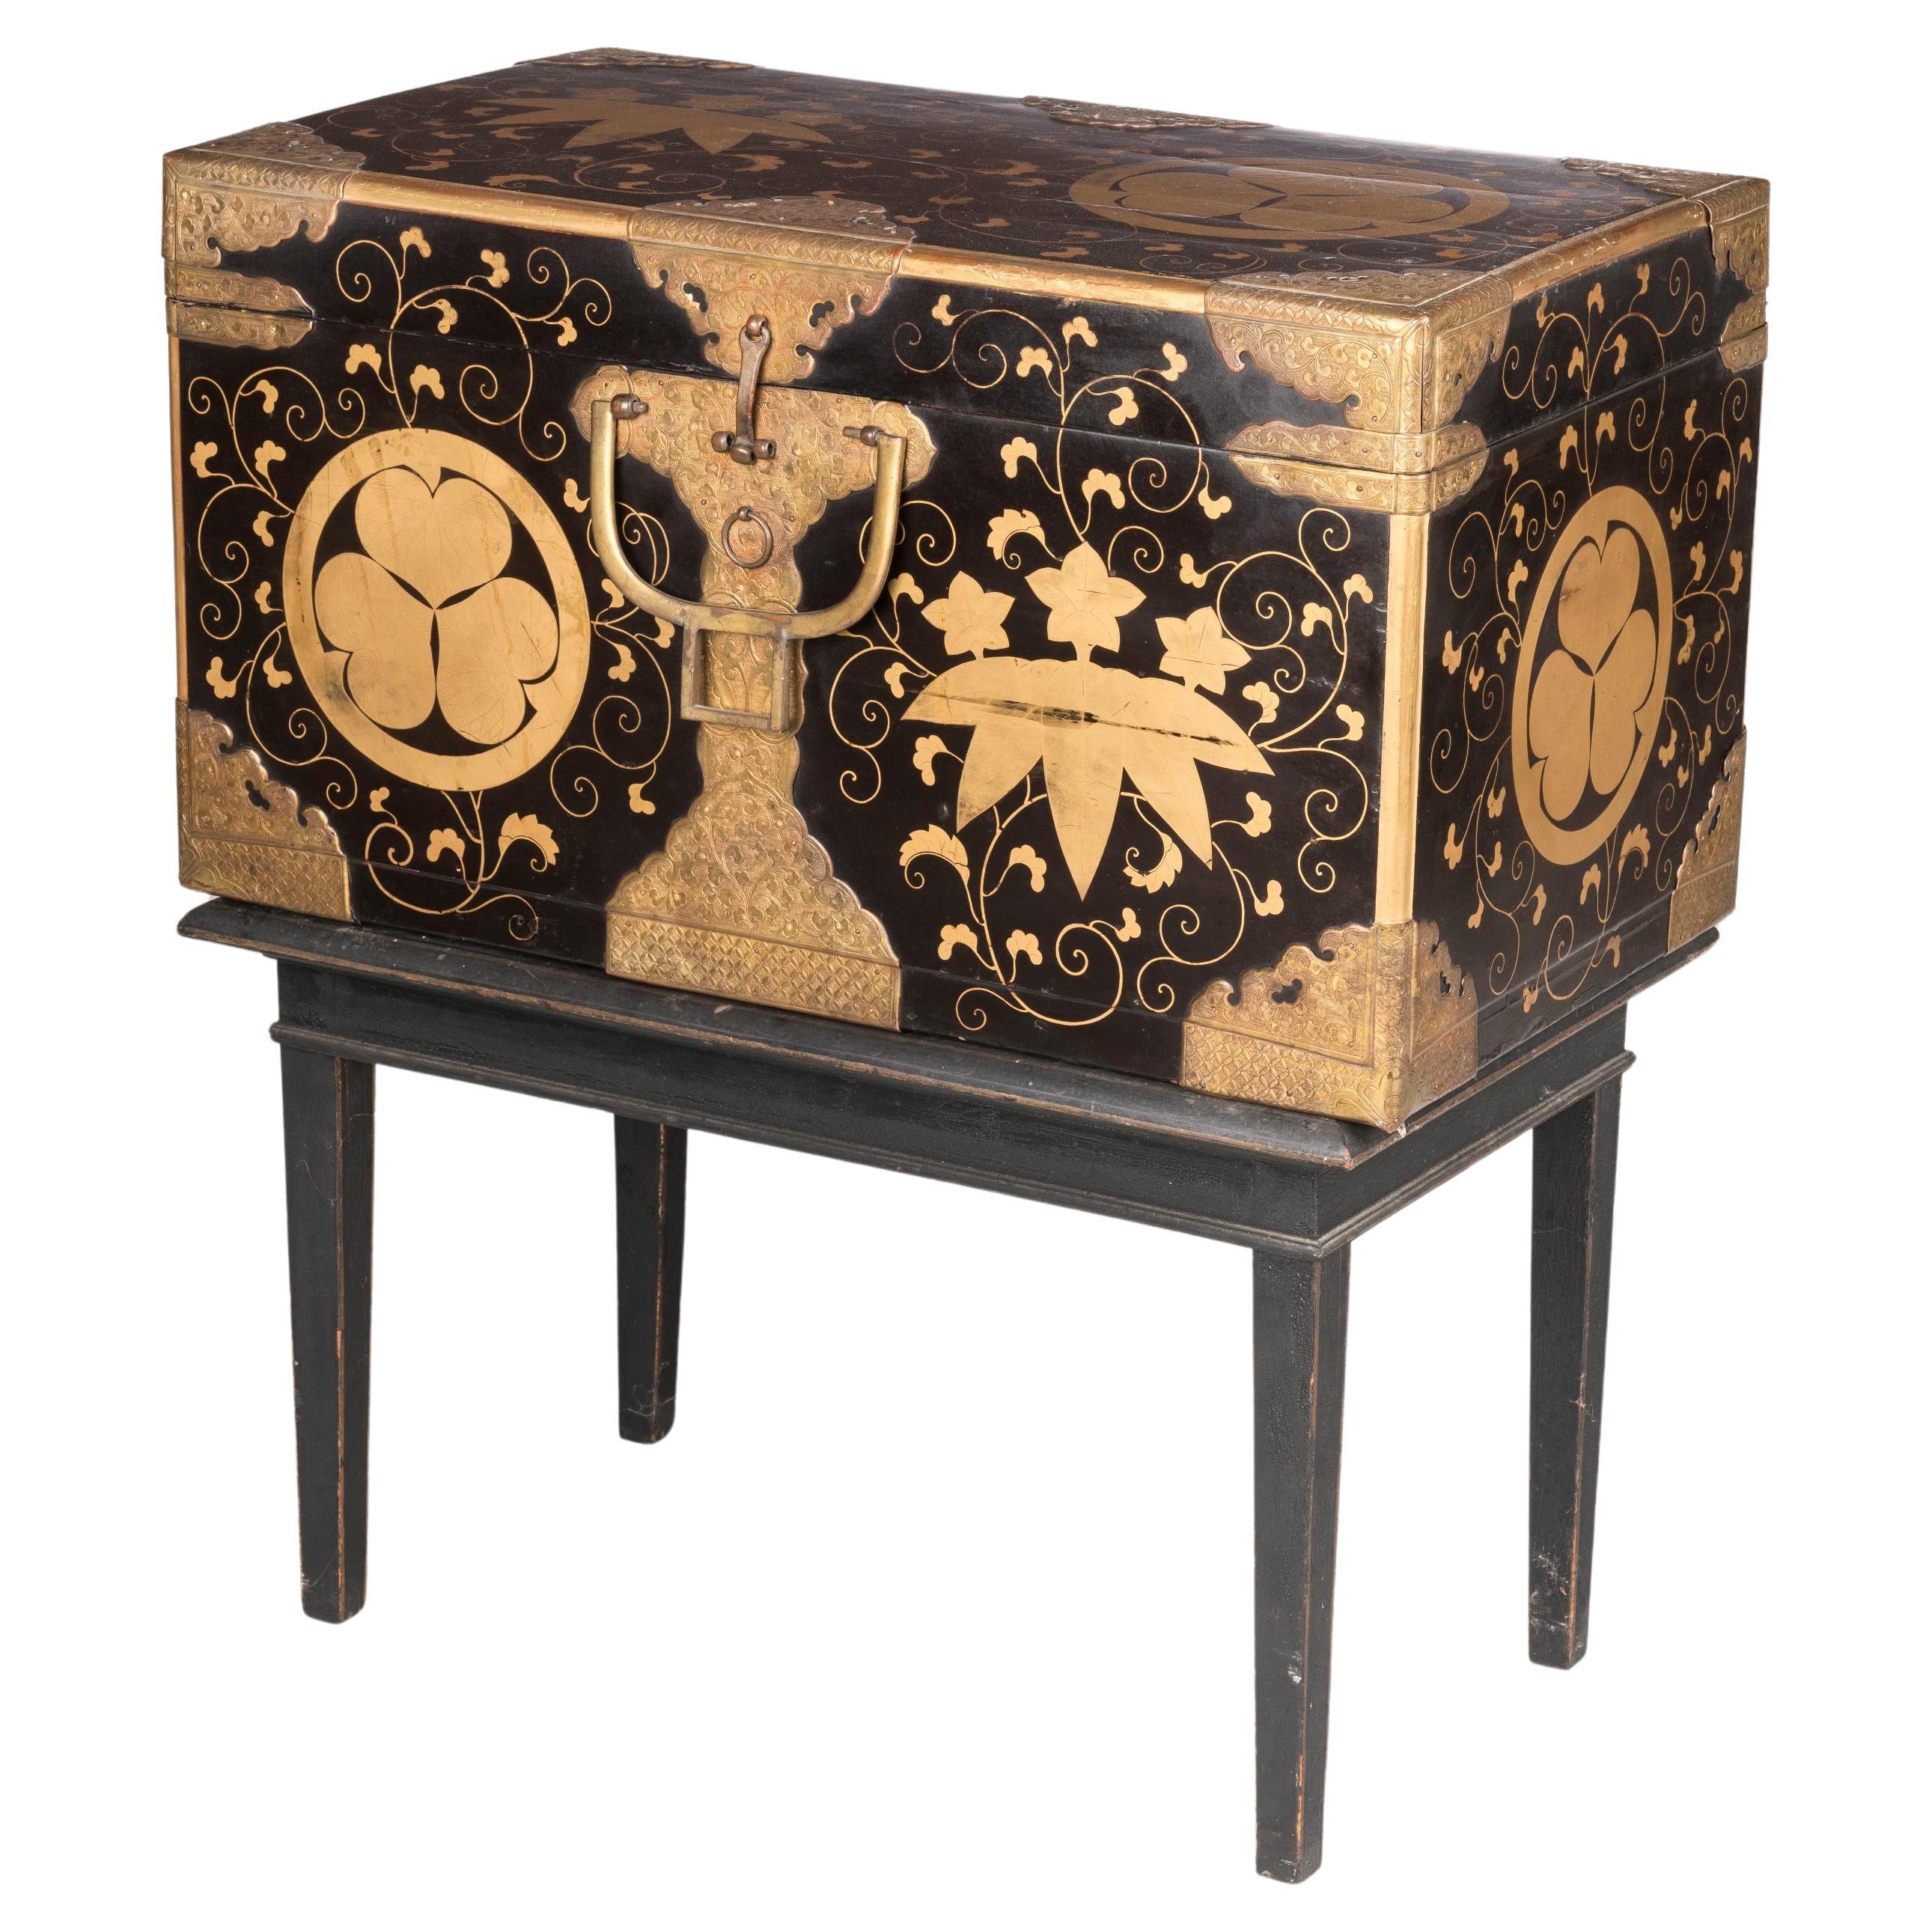 Japanese Edo Period Black & Gold 'Nagamochi' Dowry Trunk with Family Crests For Sale